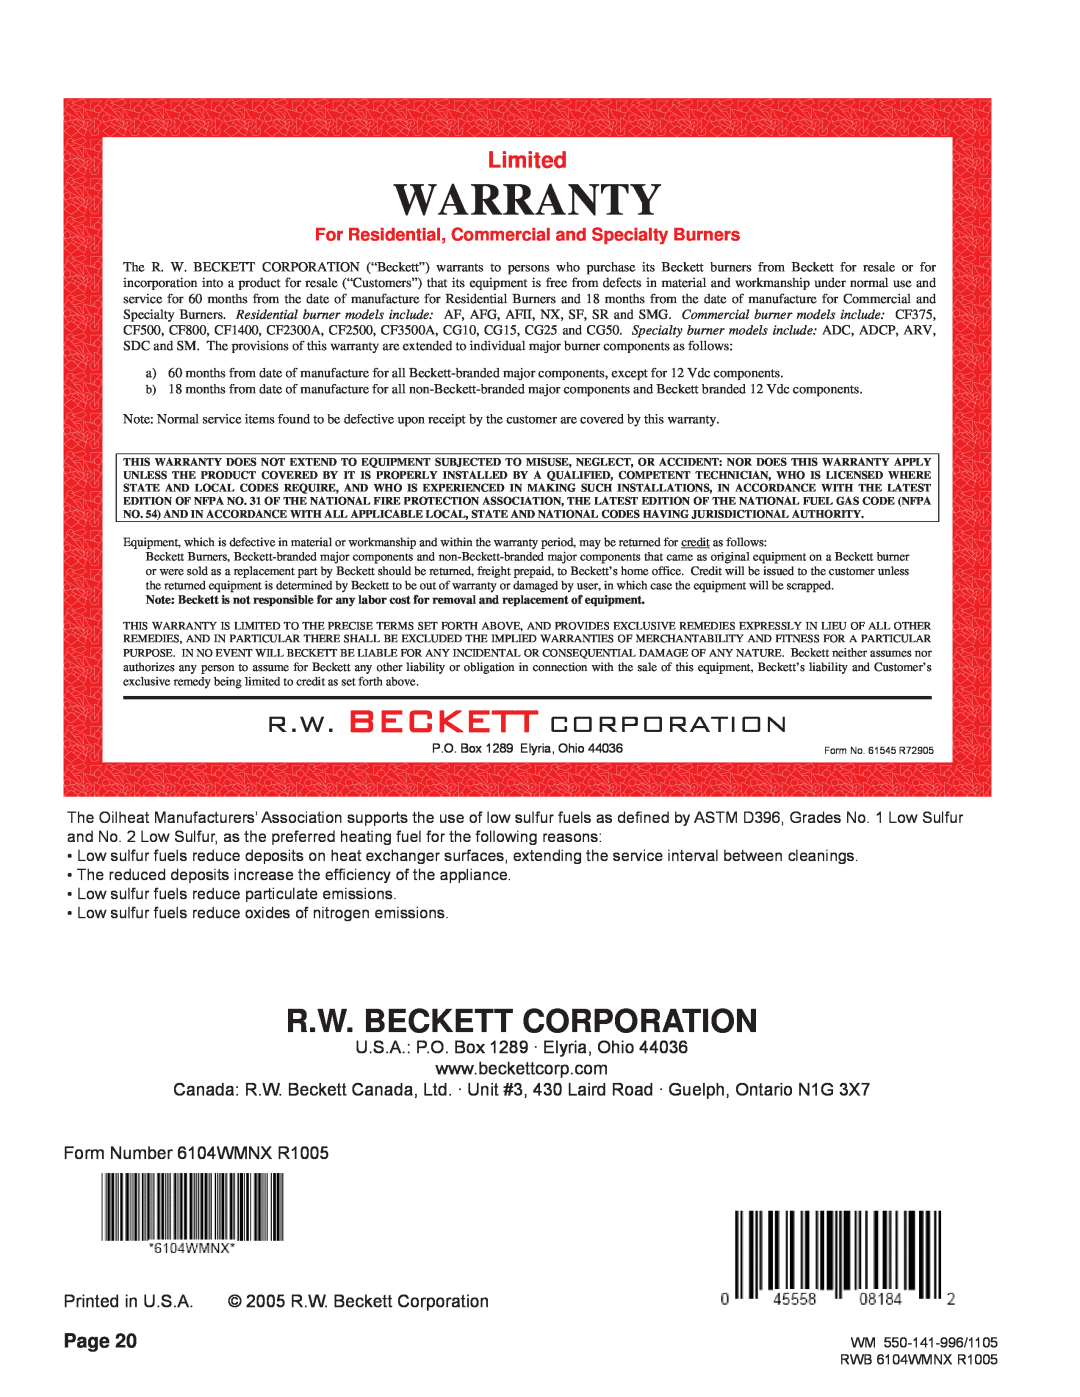 Weil-McLain NX manual Warranty, R.W. Beckett Corporation, Limited, Page, For Residential, Commercial and Specialty Burners 